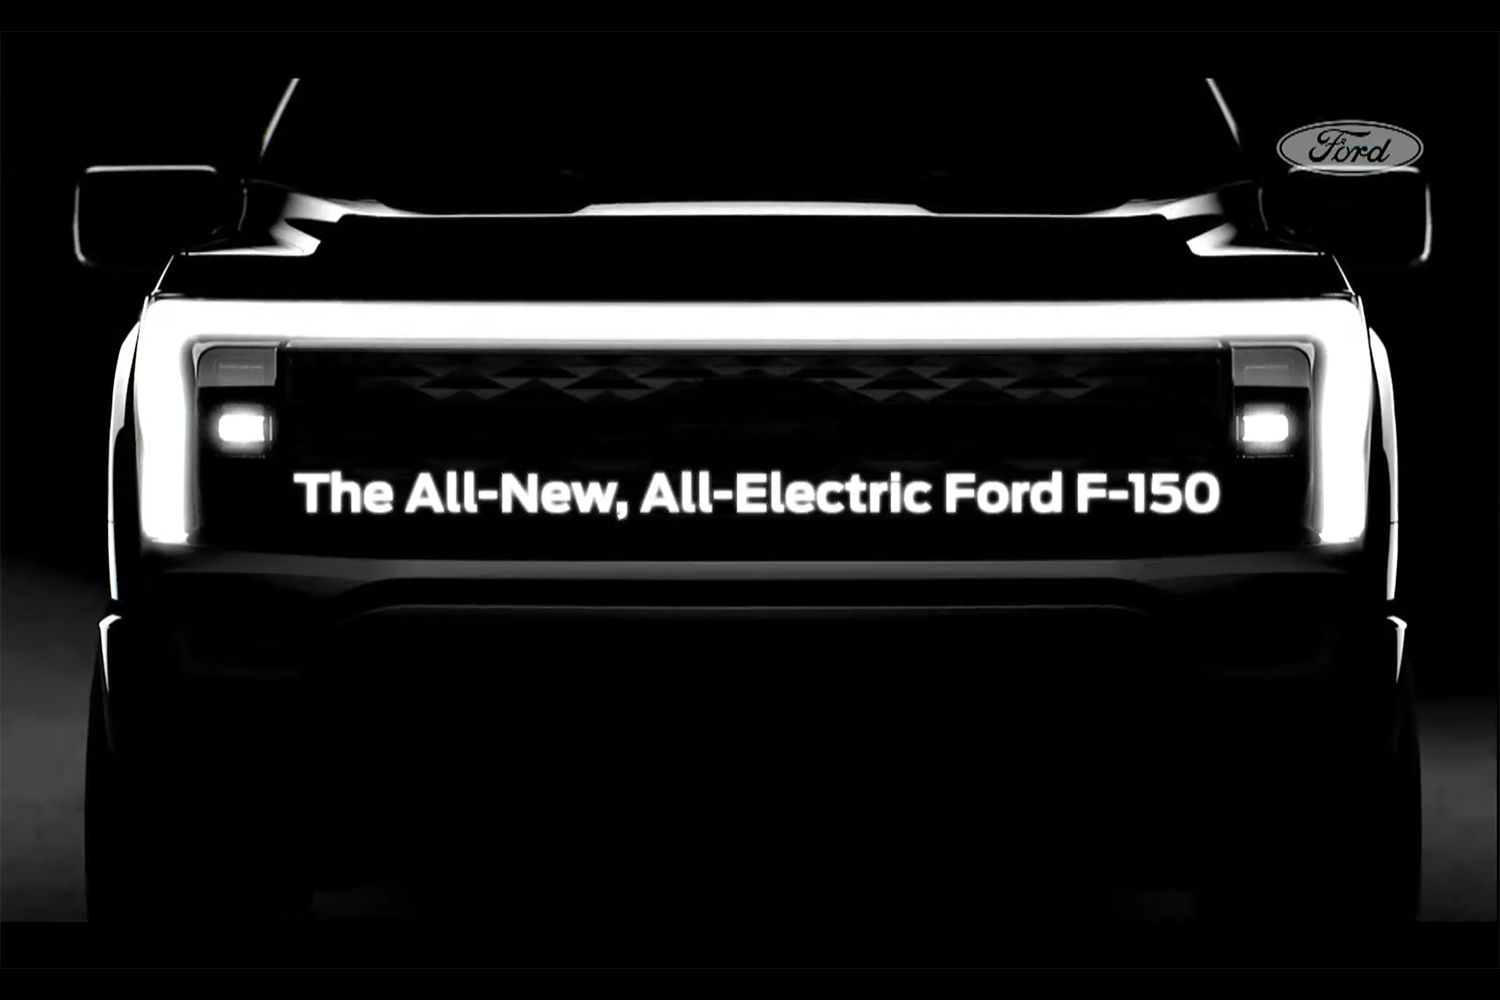 LED light bar on the front grille of the 2023 electric Ford F-150 pickup truck